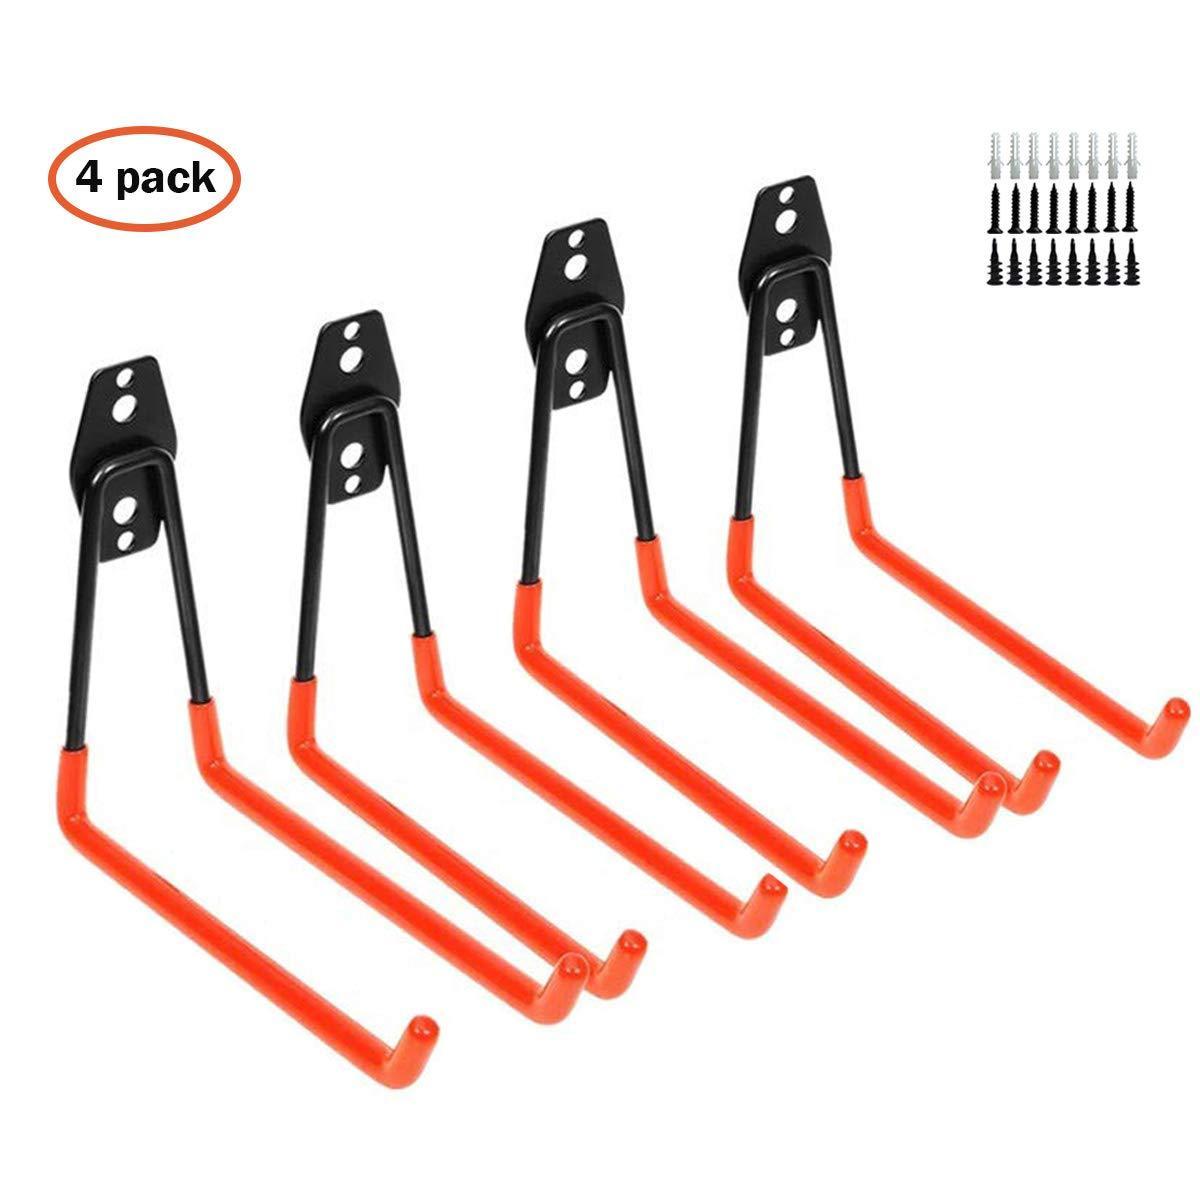 Order now garage hooks heavy duty storage utility hangers wall mount garage orgnaizier with extended double arms for ladders bikes heavy tools garden hoses and other bulky items 4 pack orange color